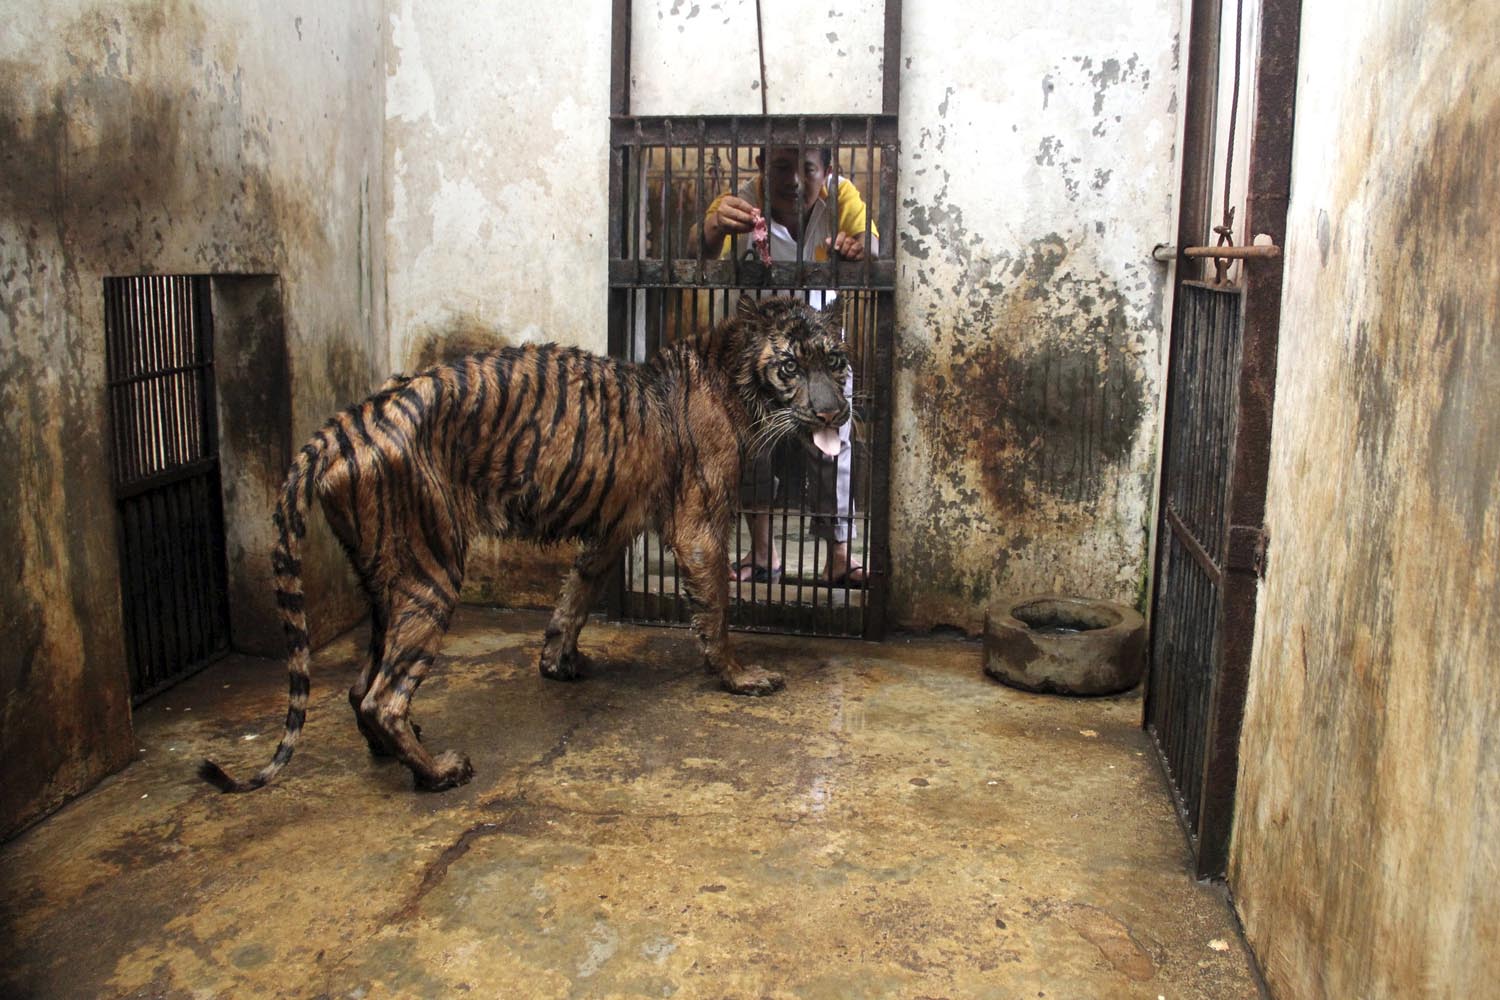 April 15, 2013. A keeper tries to feed Melani, a 15-year-old female Sumatran tiger that has been suffering  from an undiagnosed digestive disorder for the past five years, in her cage at Surabaya Zoo in Surabaya, Indonesia. The emaciated female Sumatran tiger was in critical condition at Indonesia's largest zoo Wednesday and may have to be put down after another rare tiger died at the problem-plagued facility earlier this month.